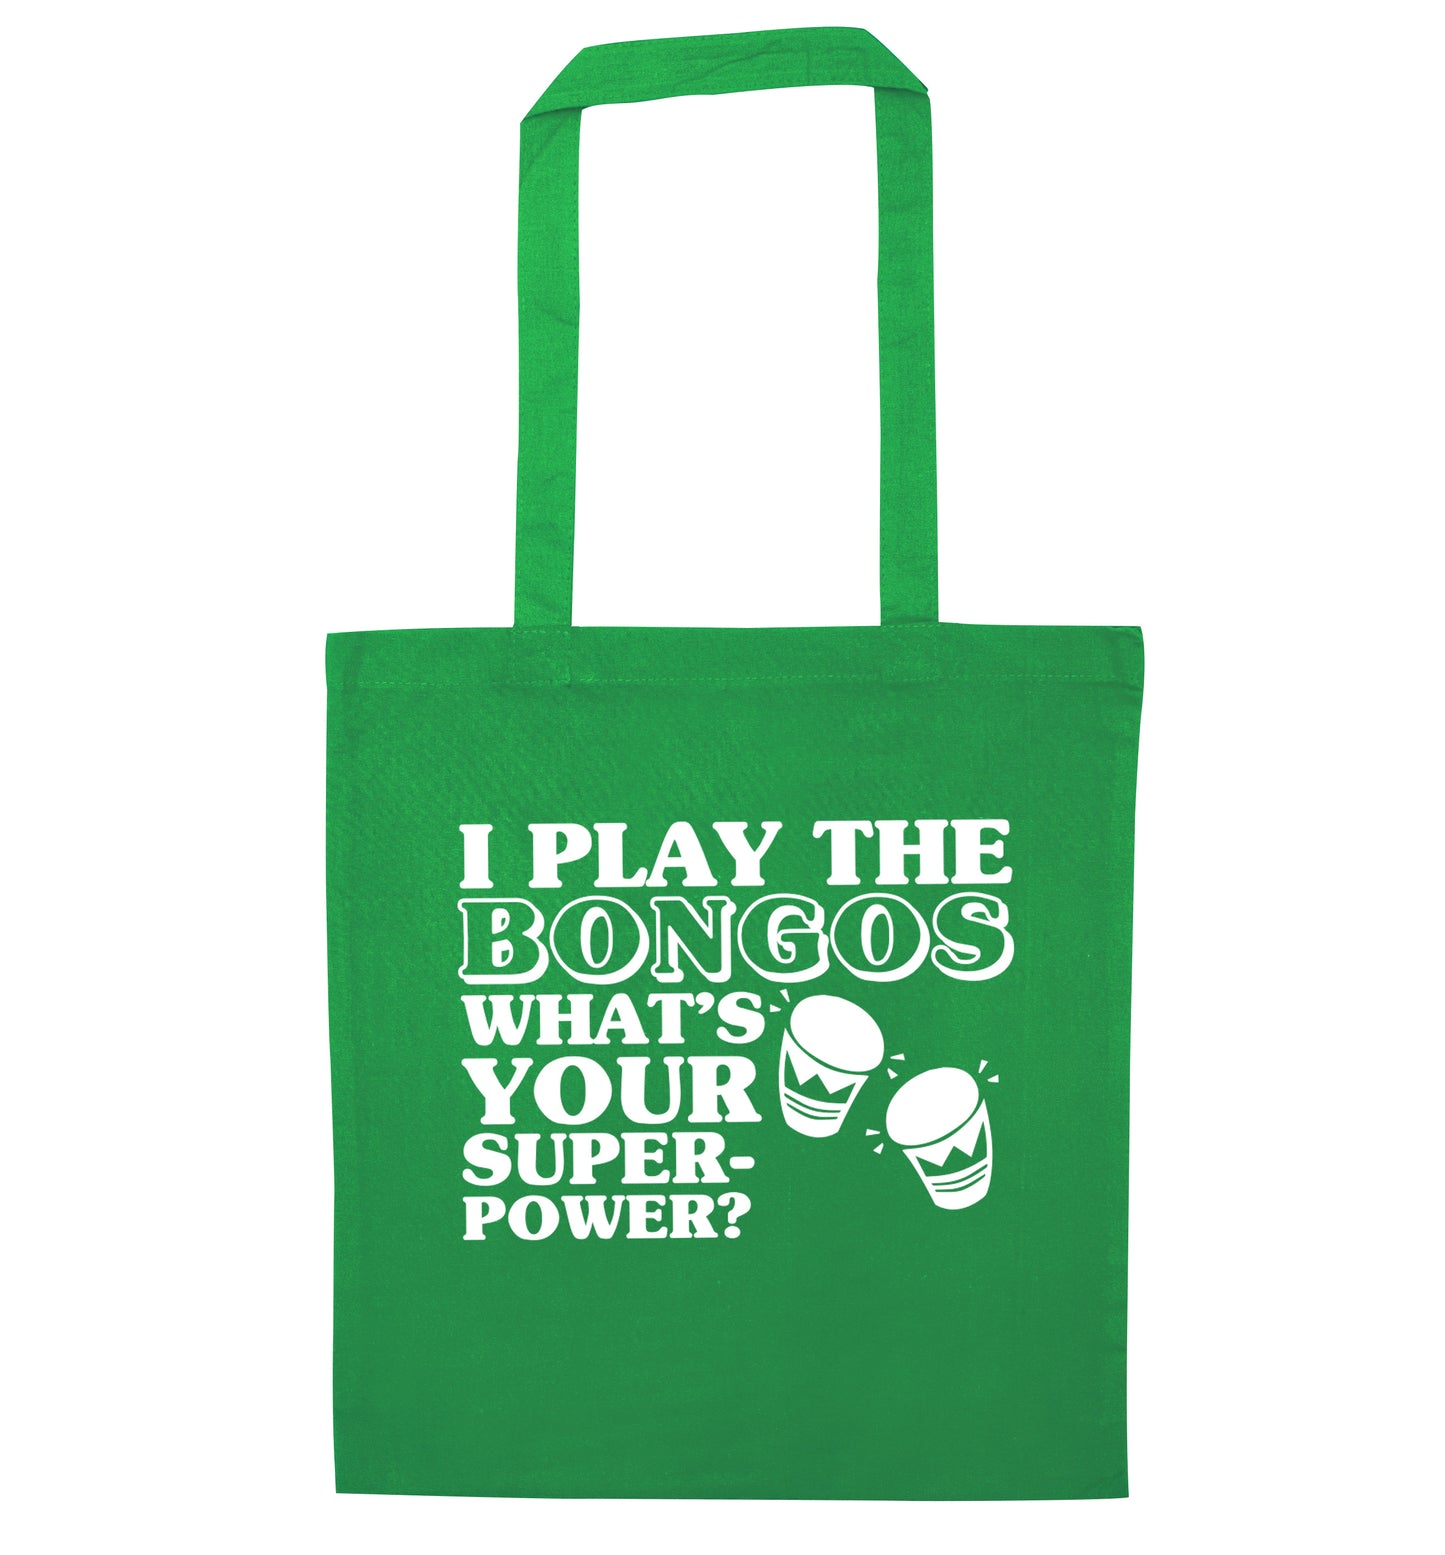 I play the bongos what's your superpower? green tote bag